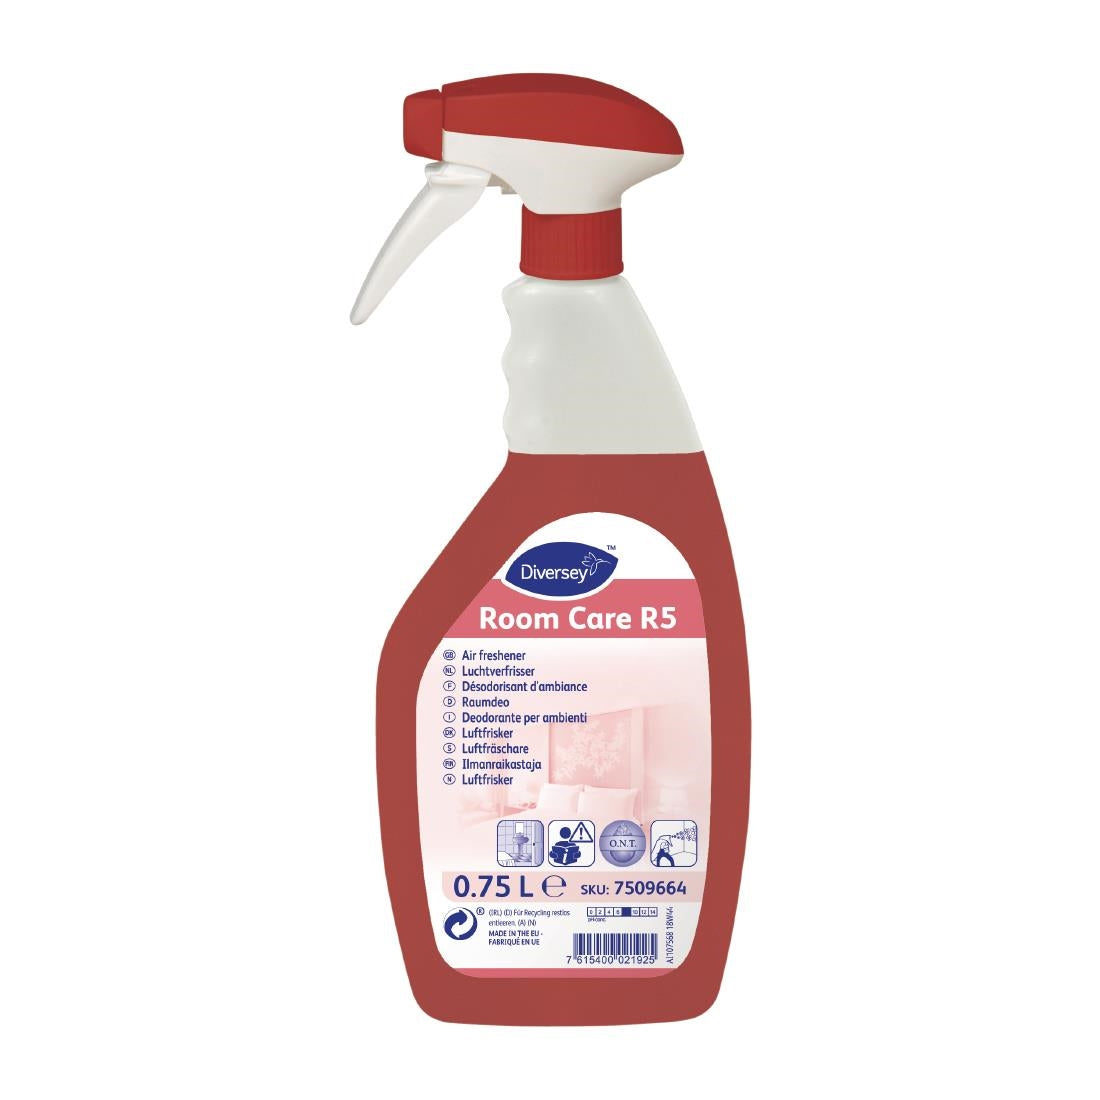 CX811 Room Care R5 Air Freshener Spray Ready To Use 750ml JD Catering Equipment Solutions Ltd